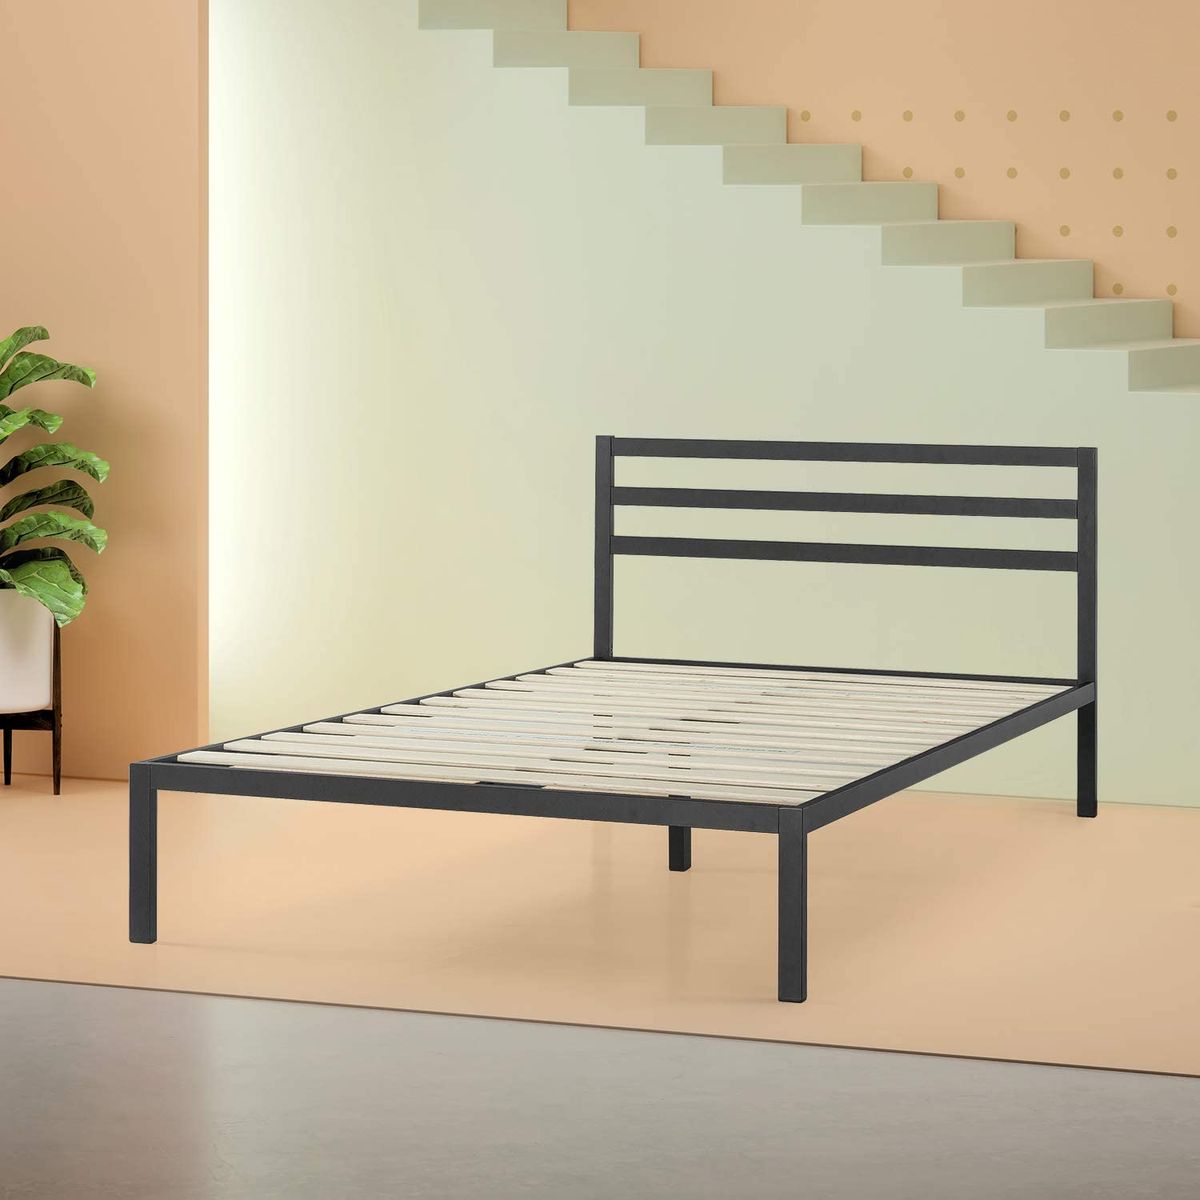 19 Best Metal Bed Frames 2020 The, Metal Bed Frame Attach Headboard Footboard